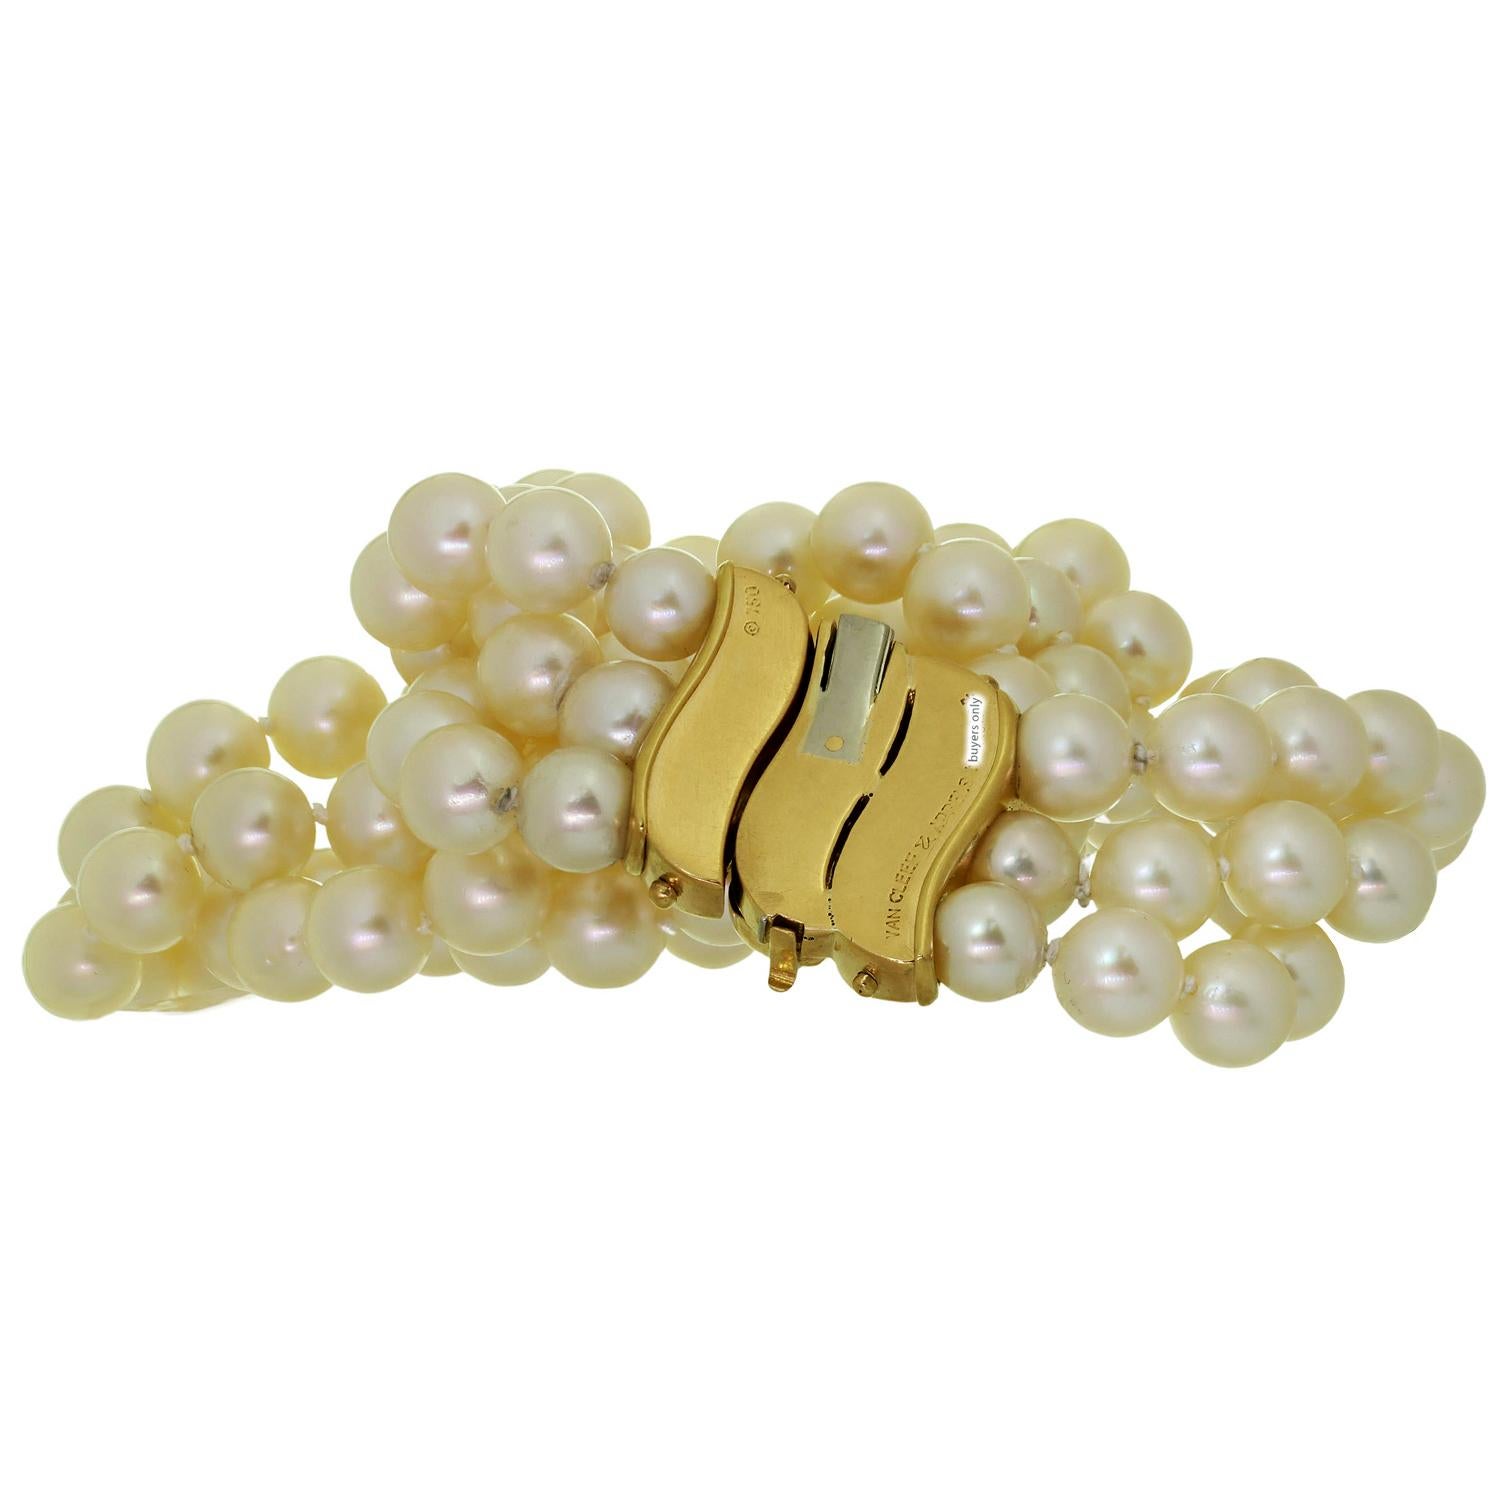 This exquisite vintage authentic Van Cleef & Arpels necklace features three strands of cultured pearls, a total of 143 pearls, creamy white in color, with medium luster, measuring 8.5mm - 9.0mm in diameter, complimented with an 18k yellow gold clasp